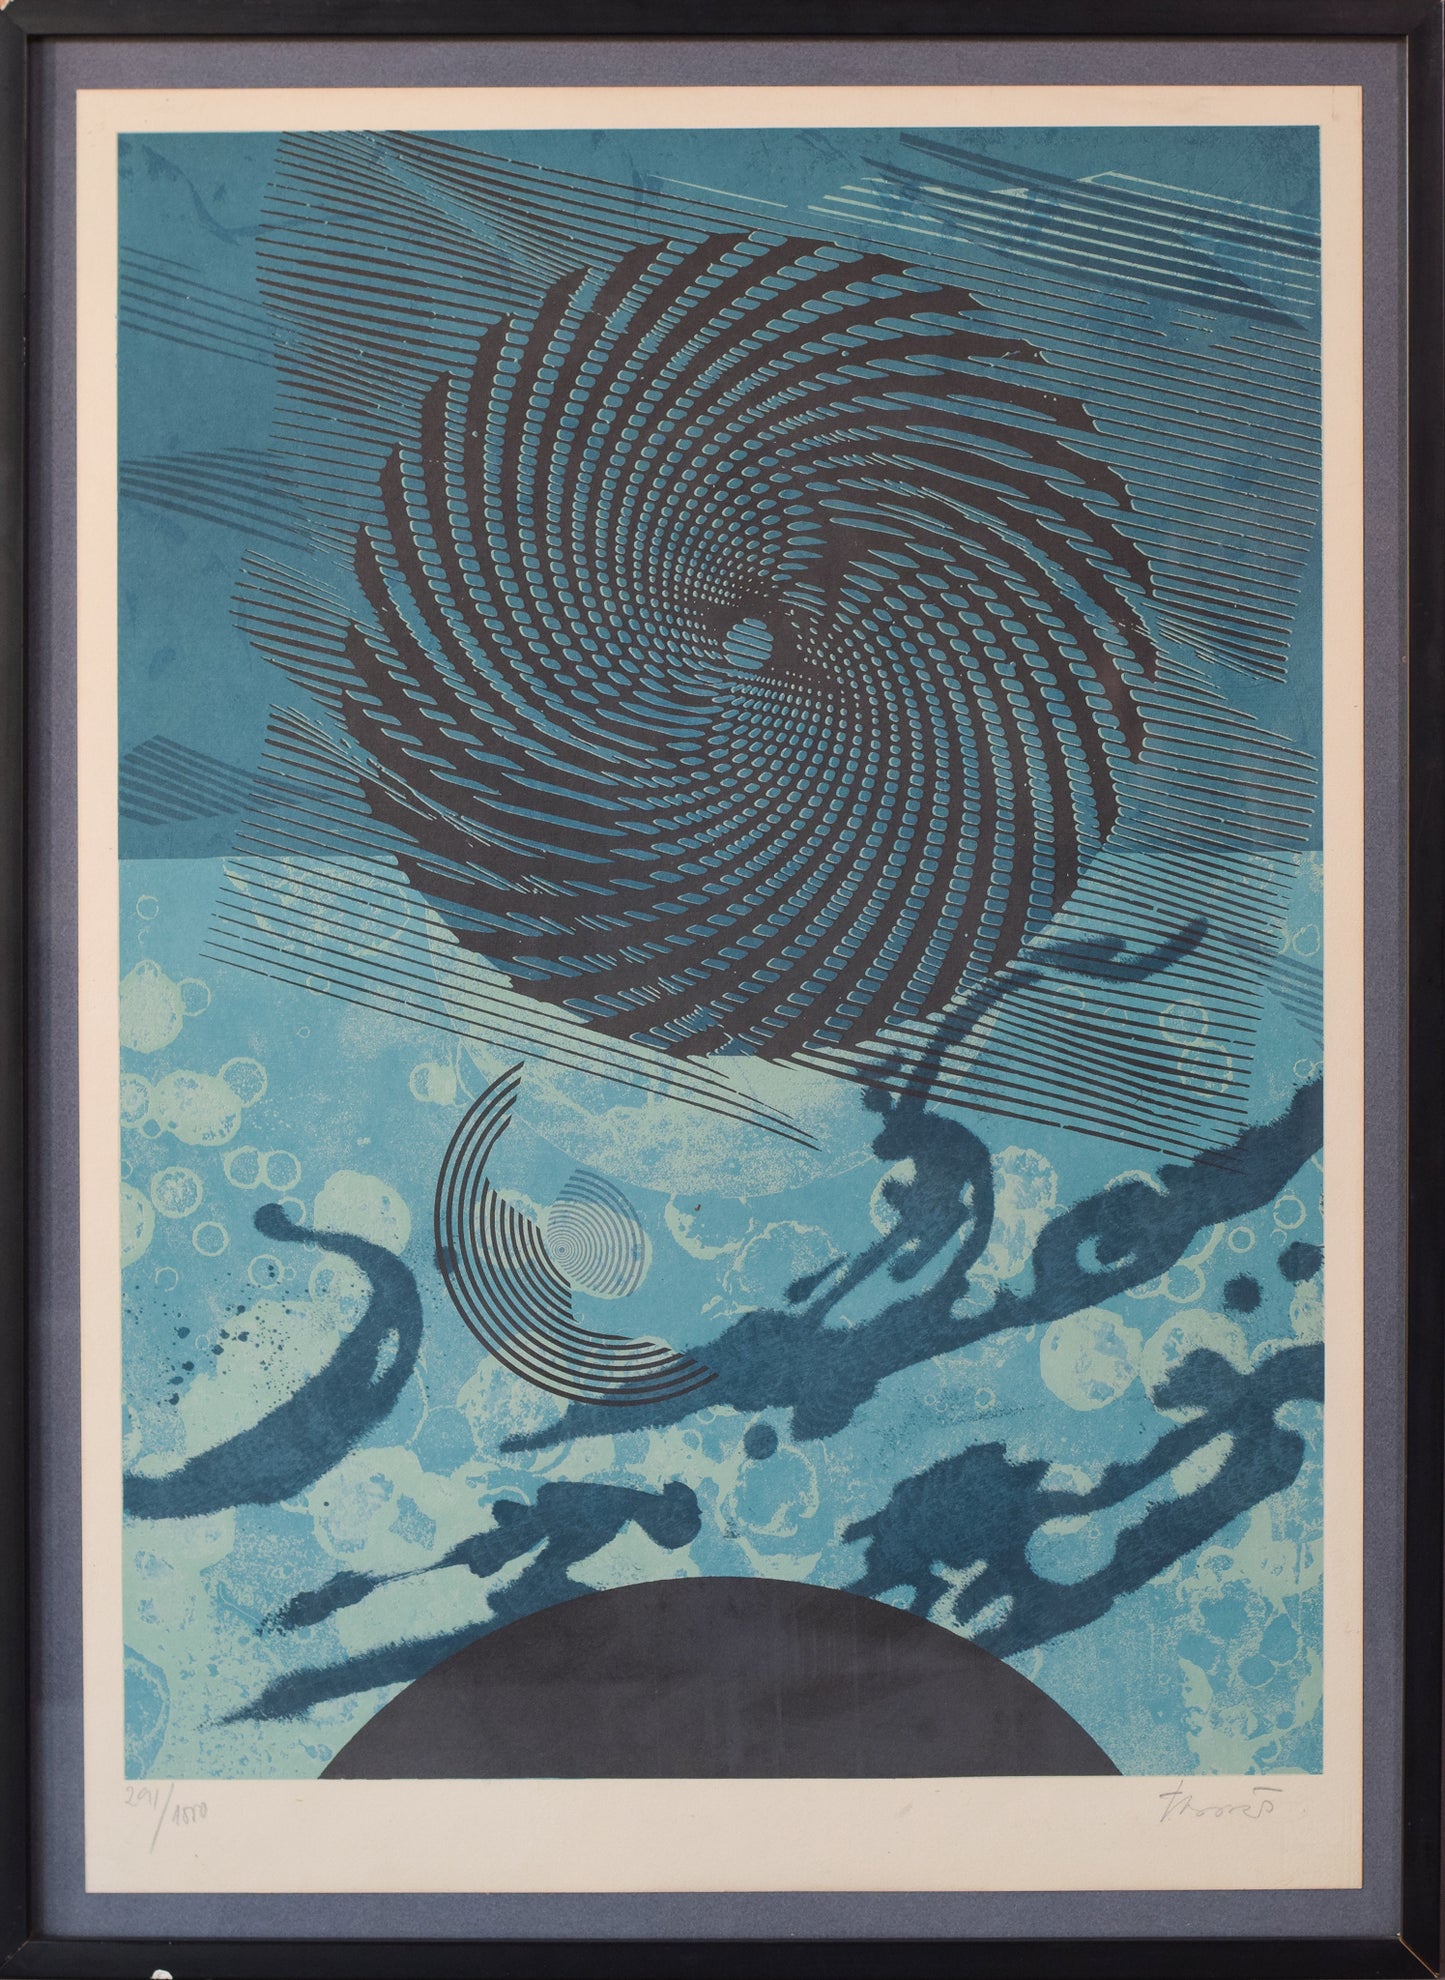 Joan-Josep Tharrats (1918-2001) 'Circulo Blue' - Numbered Edition and Signed Lithograph